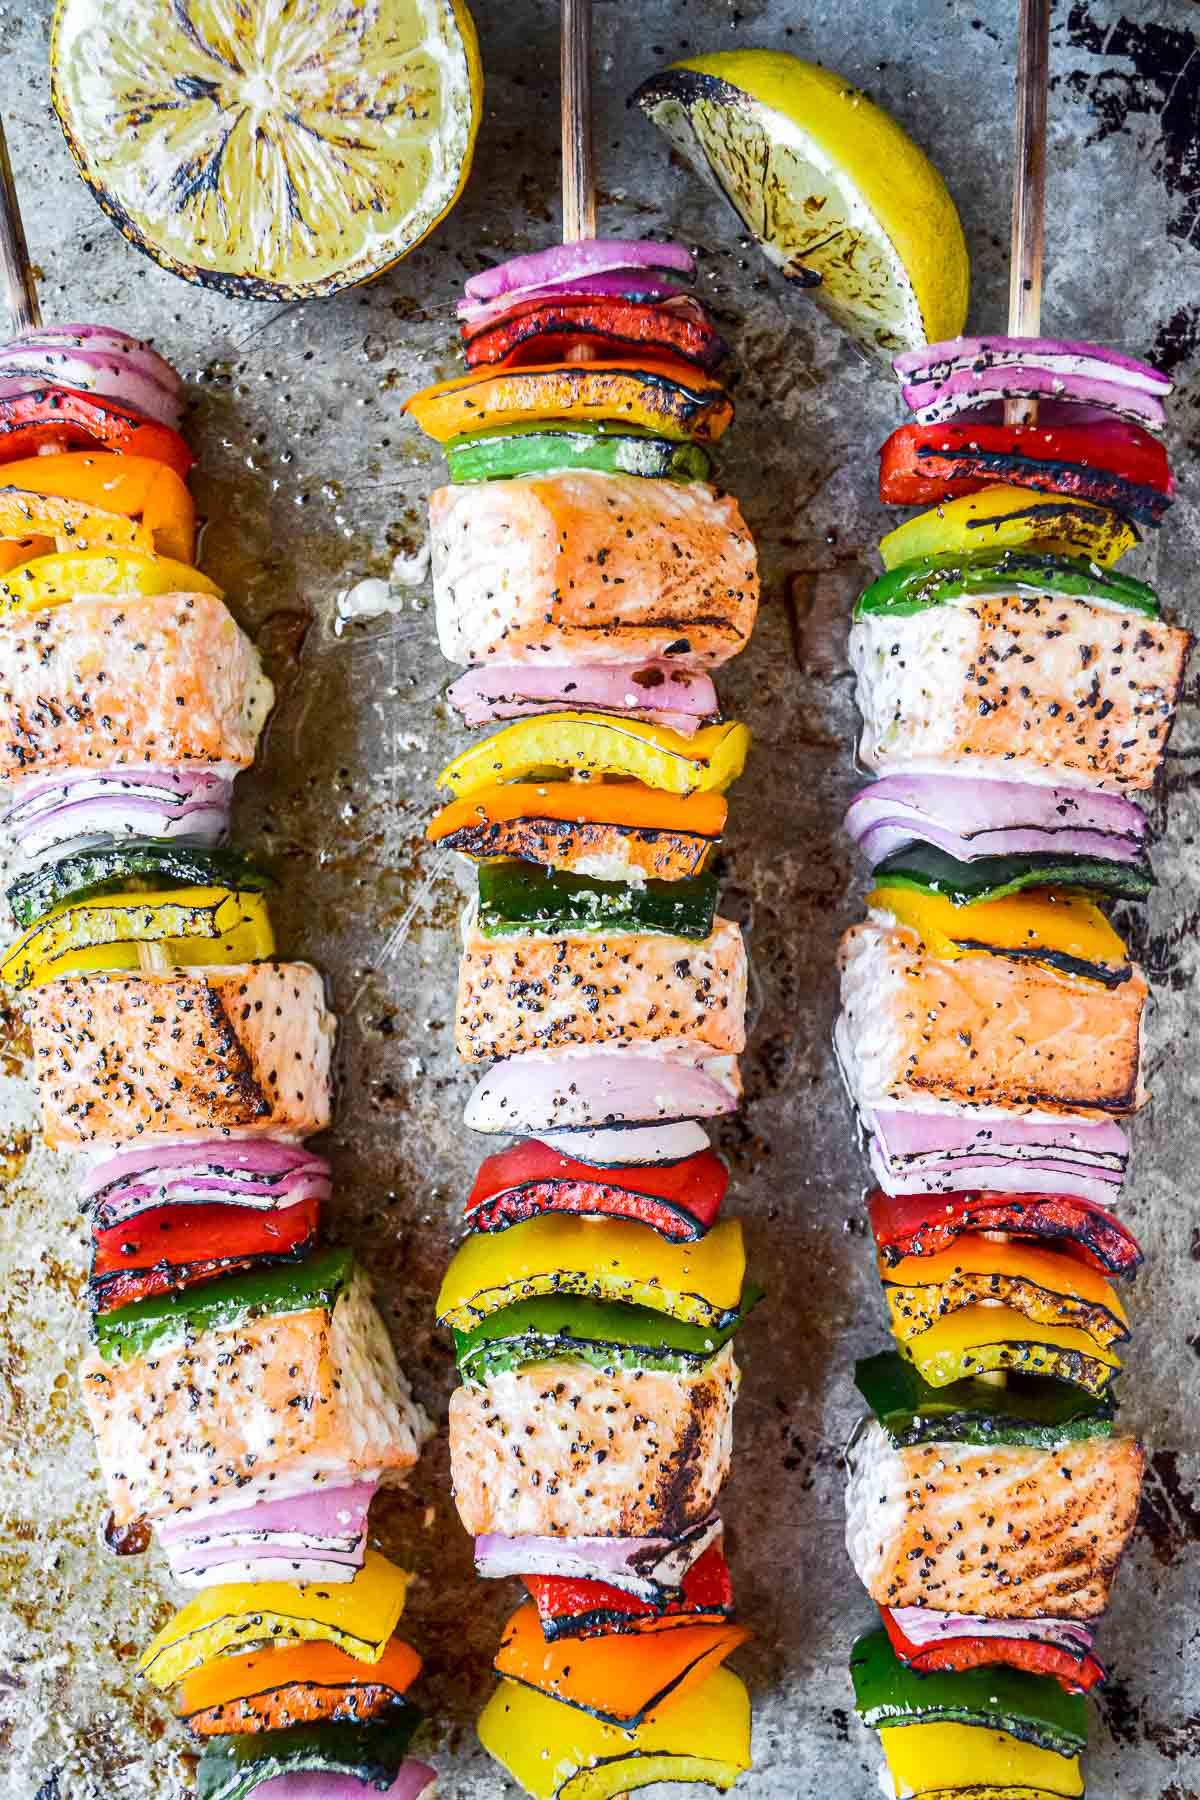 Colorful salmon and vegetable skewers ready for grilling, seasoned with herbs and spices, accompanied by lemon slices.